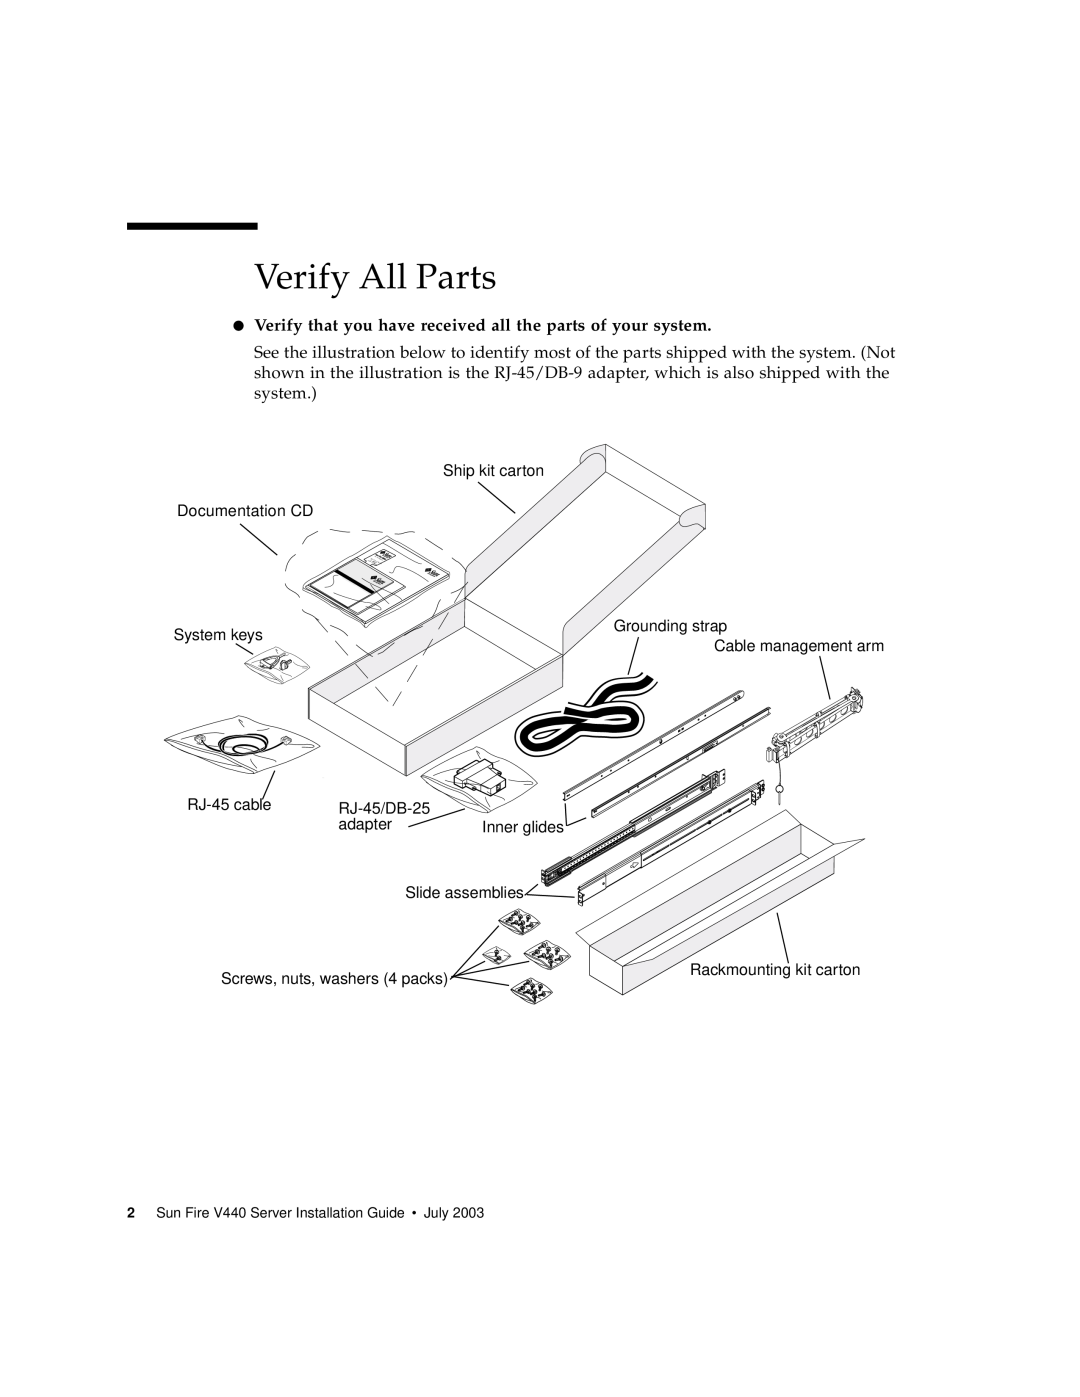 Sun Microsystems 816-7727-10 Verify All Parts, Verify that you have received all the parts of your system, Inner glides 